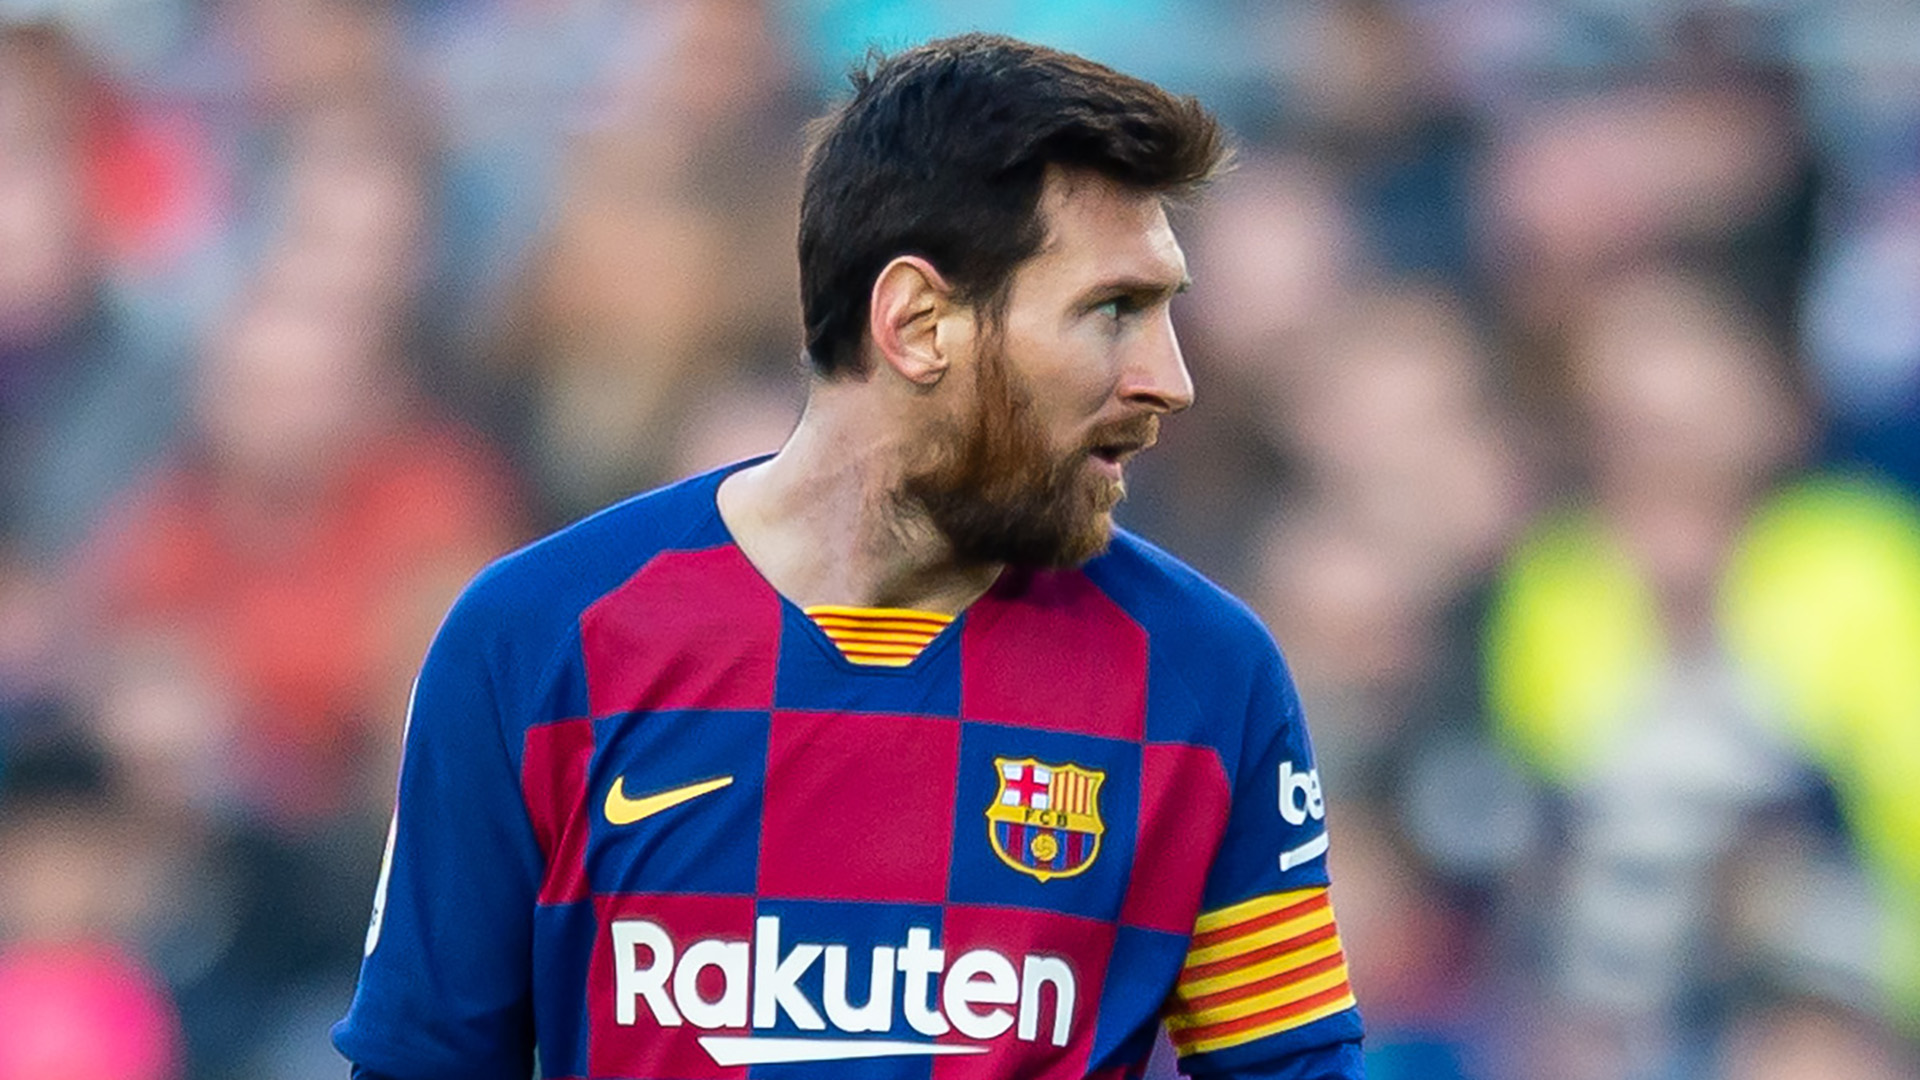 20th season in professional football for the 'king of football' - A tribute to Lionel Messi